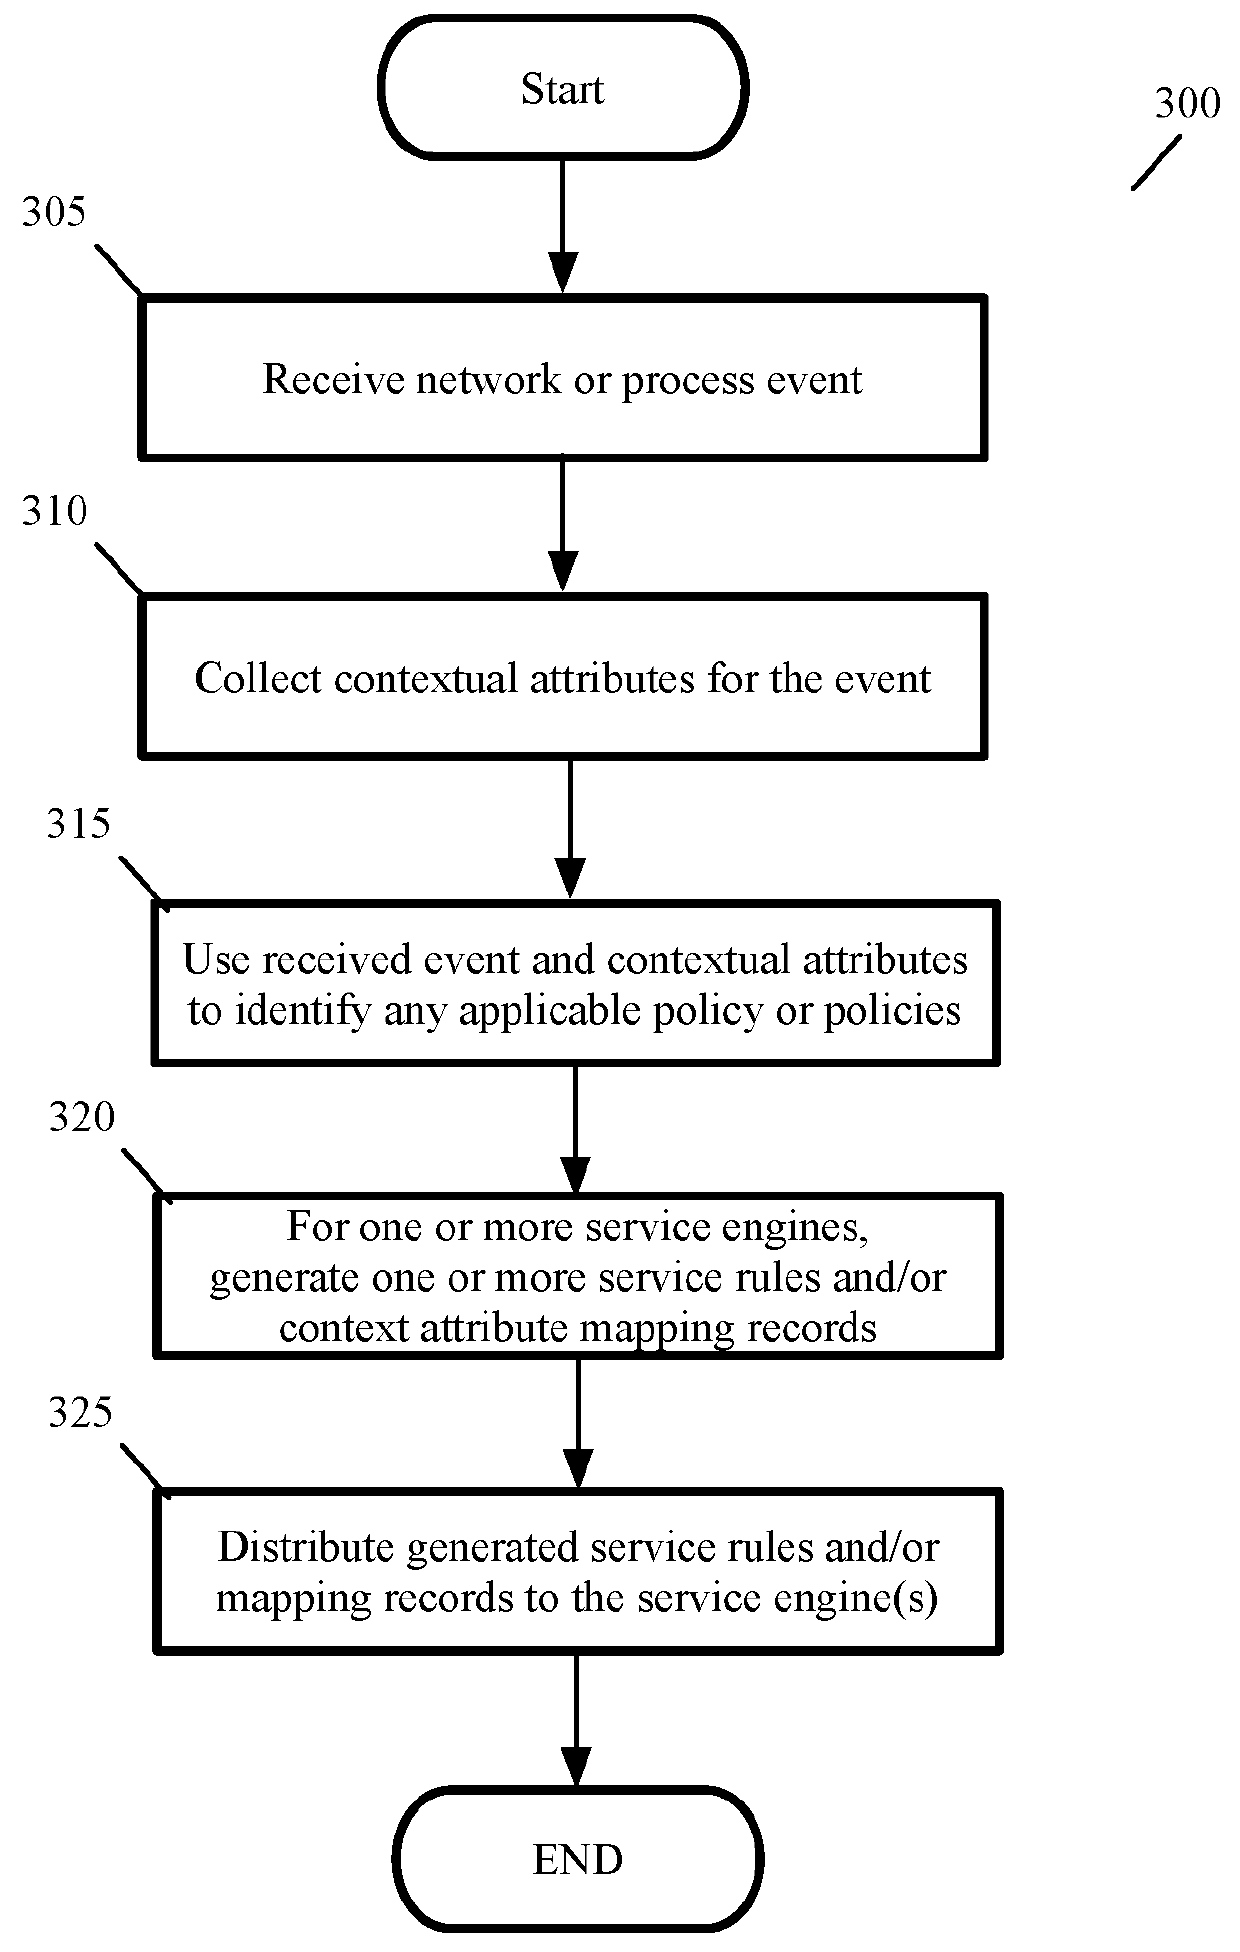 Performing context-rich attribute-based process control services on a host